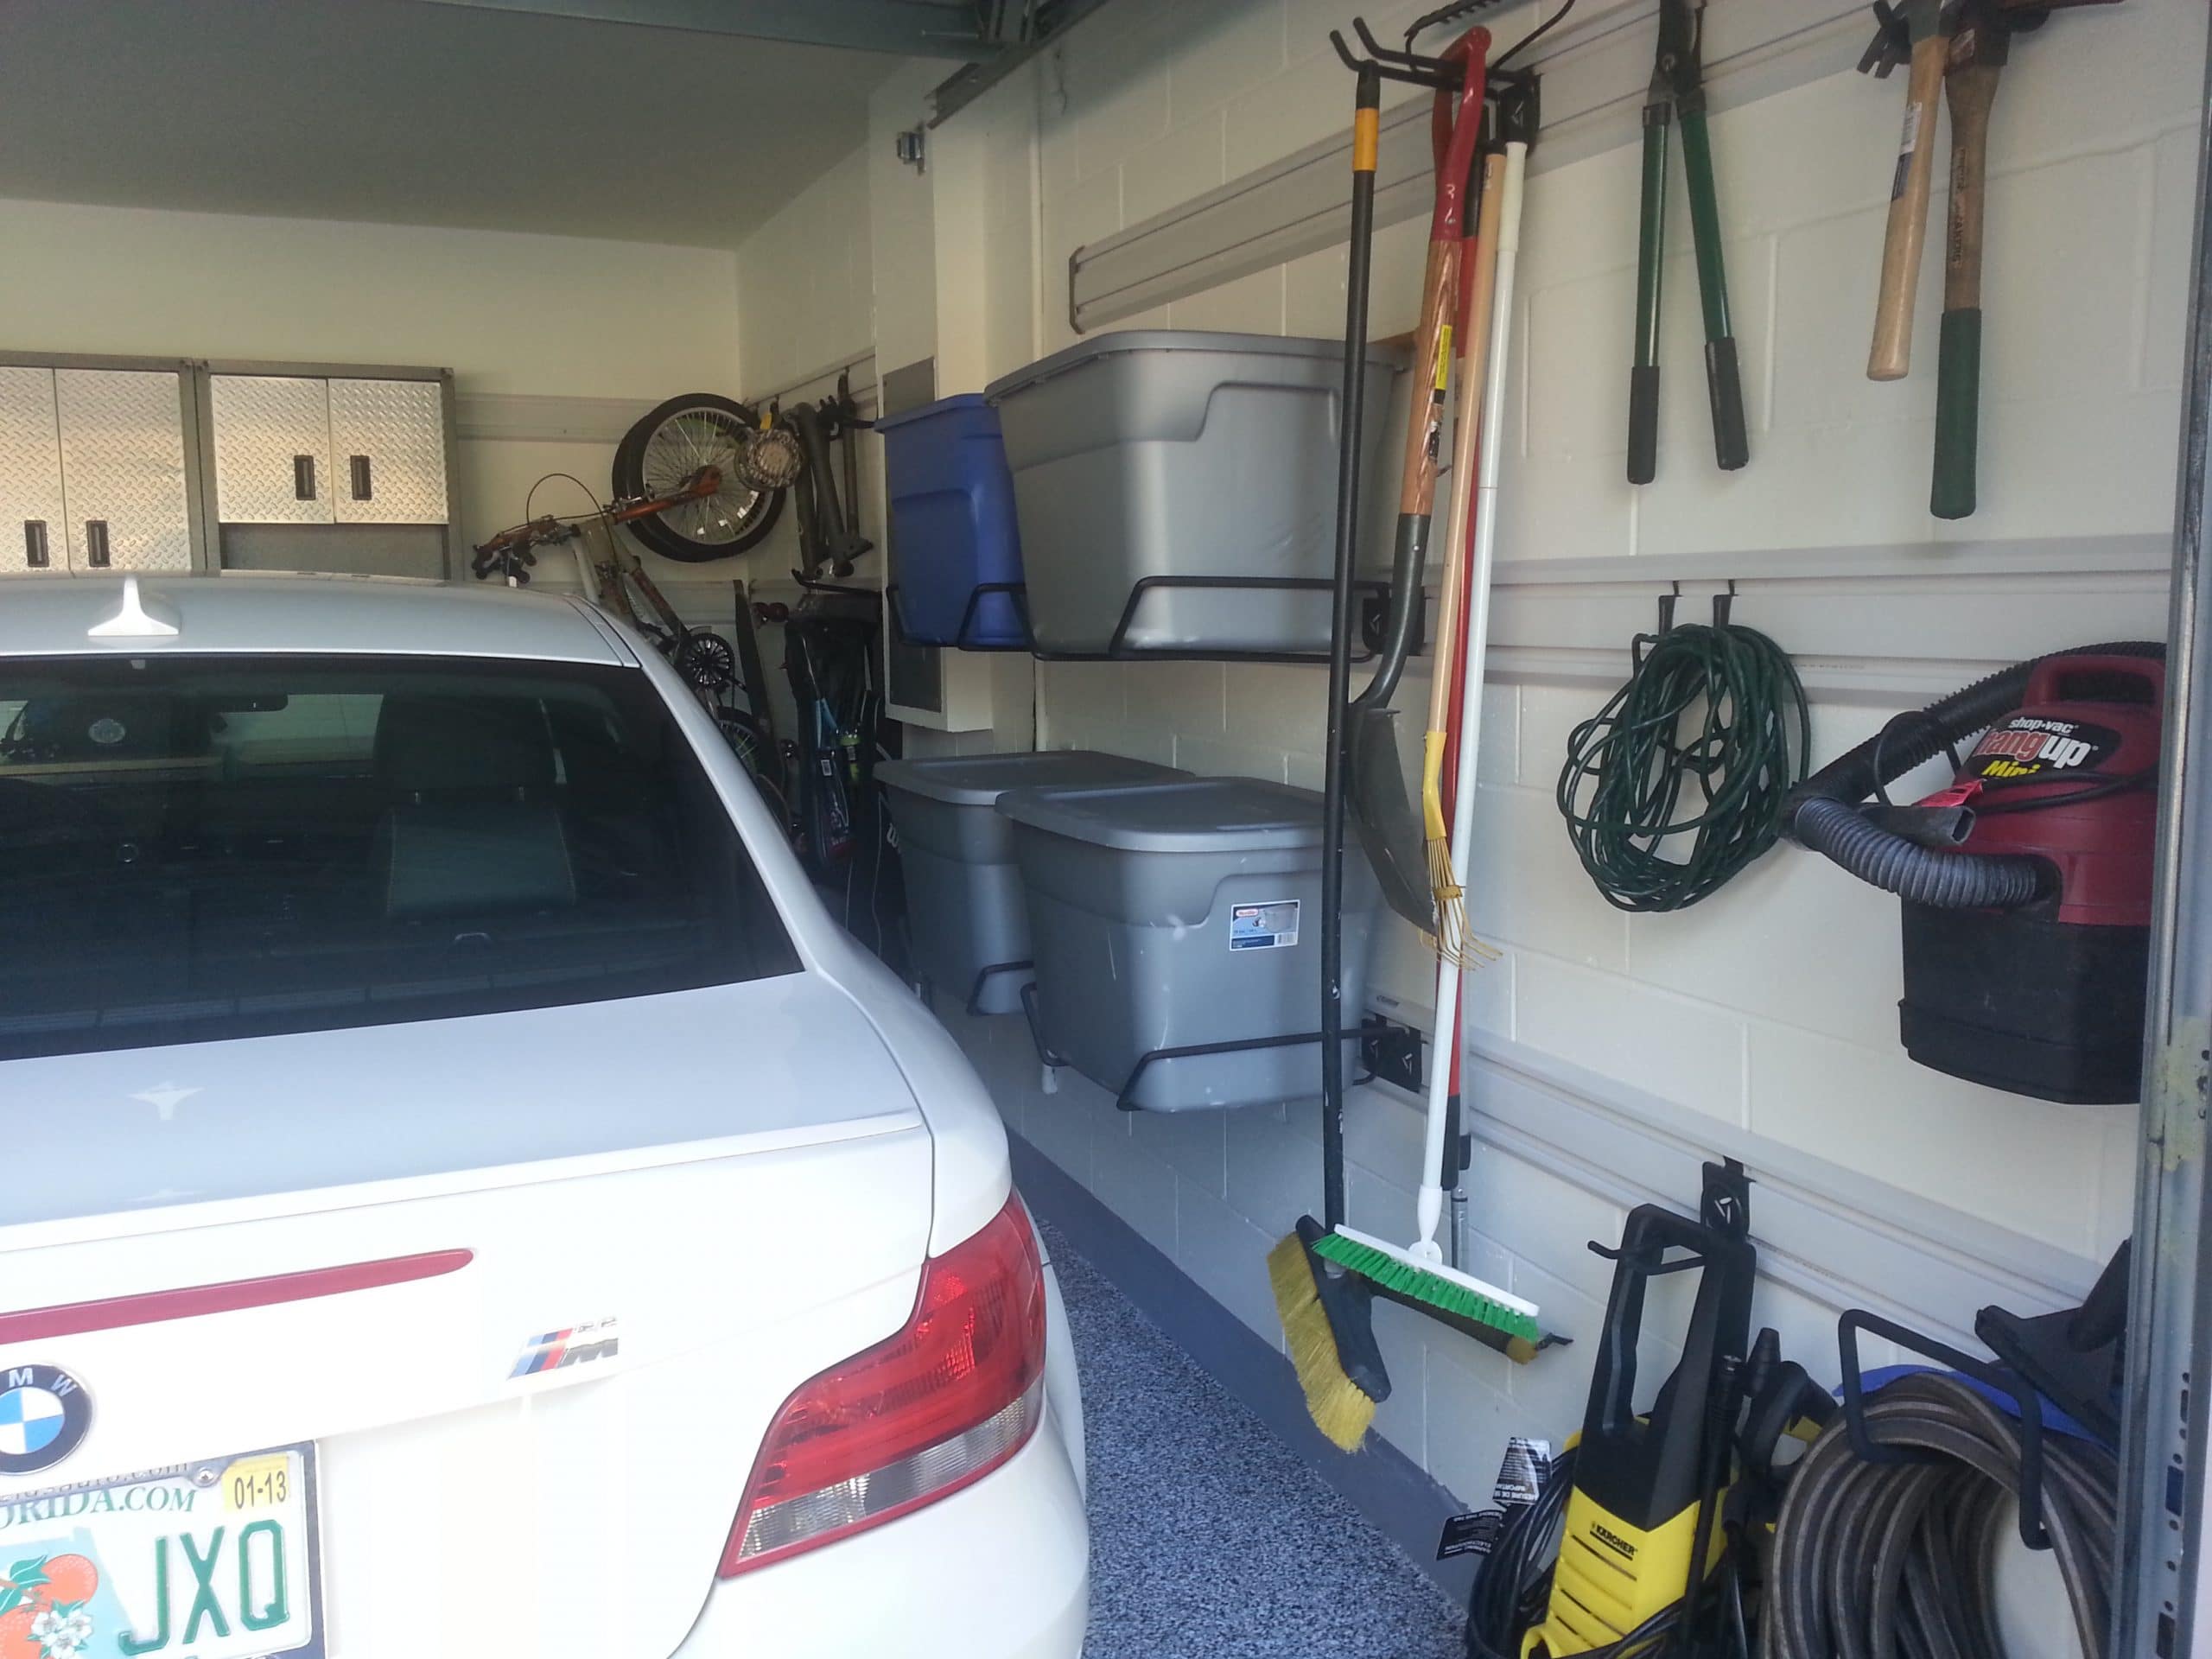 You are currently viewing Top Fire Hazards in Garage Storage Space